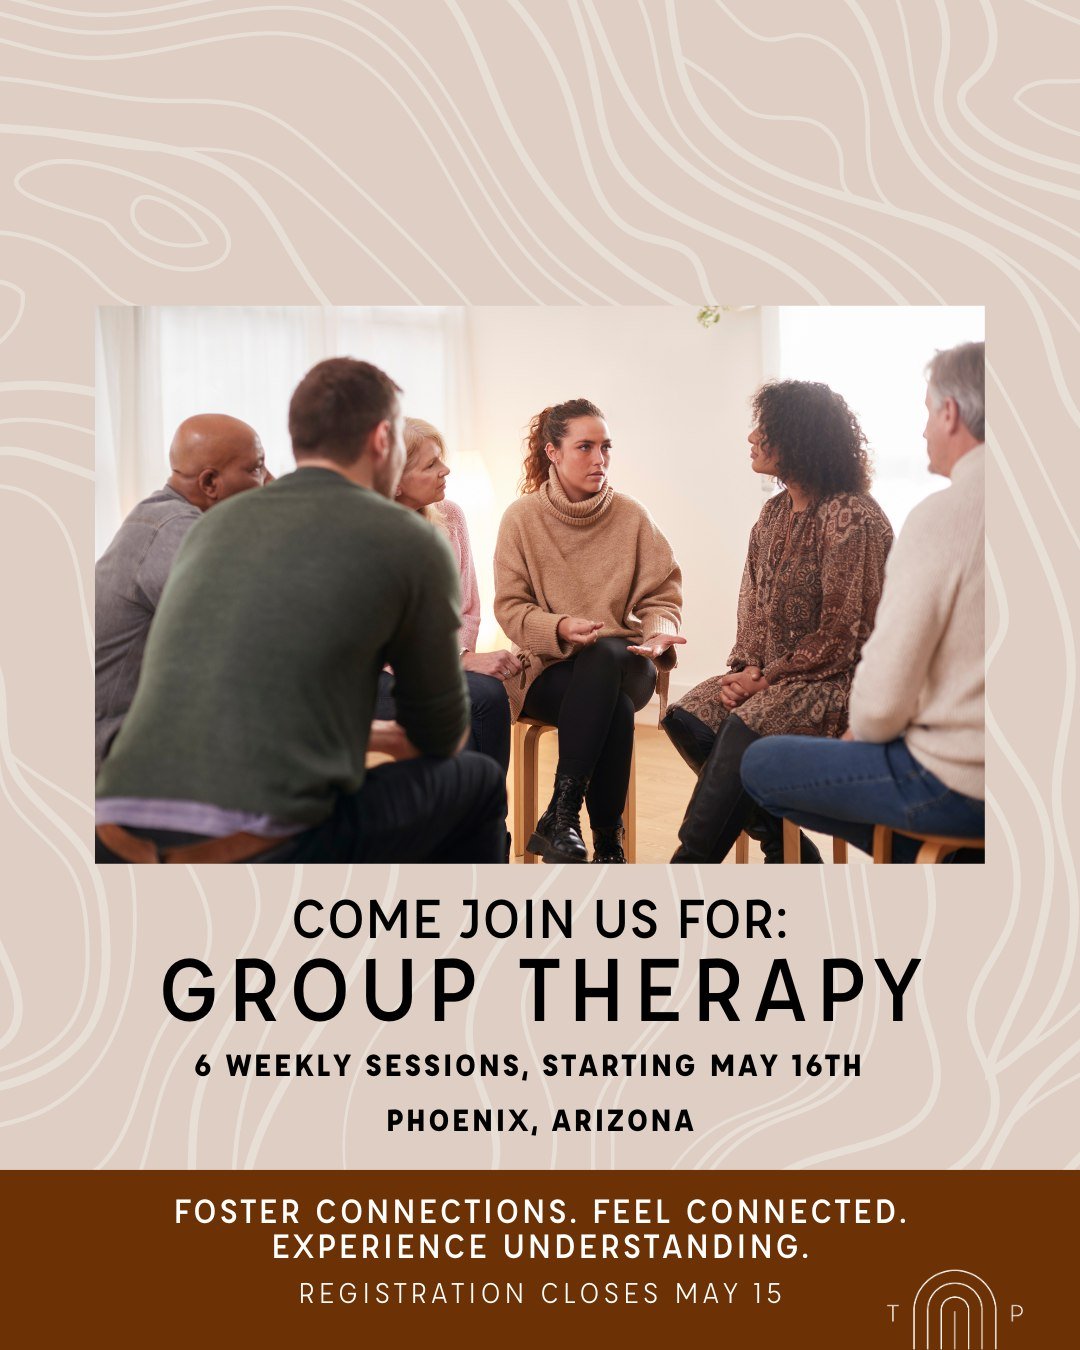 Ever thought about starting group therapy? 🧡

Here's your chance!

Guided by compassionate mental health professionals, these 6 sessions offer a unique opportunity for personal growth and connection.

Engaging in this supportive environment, our ski